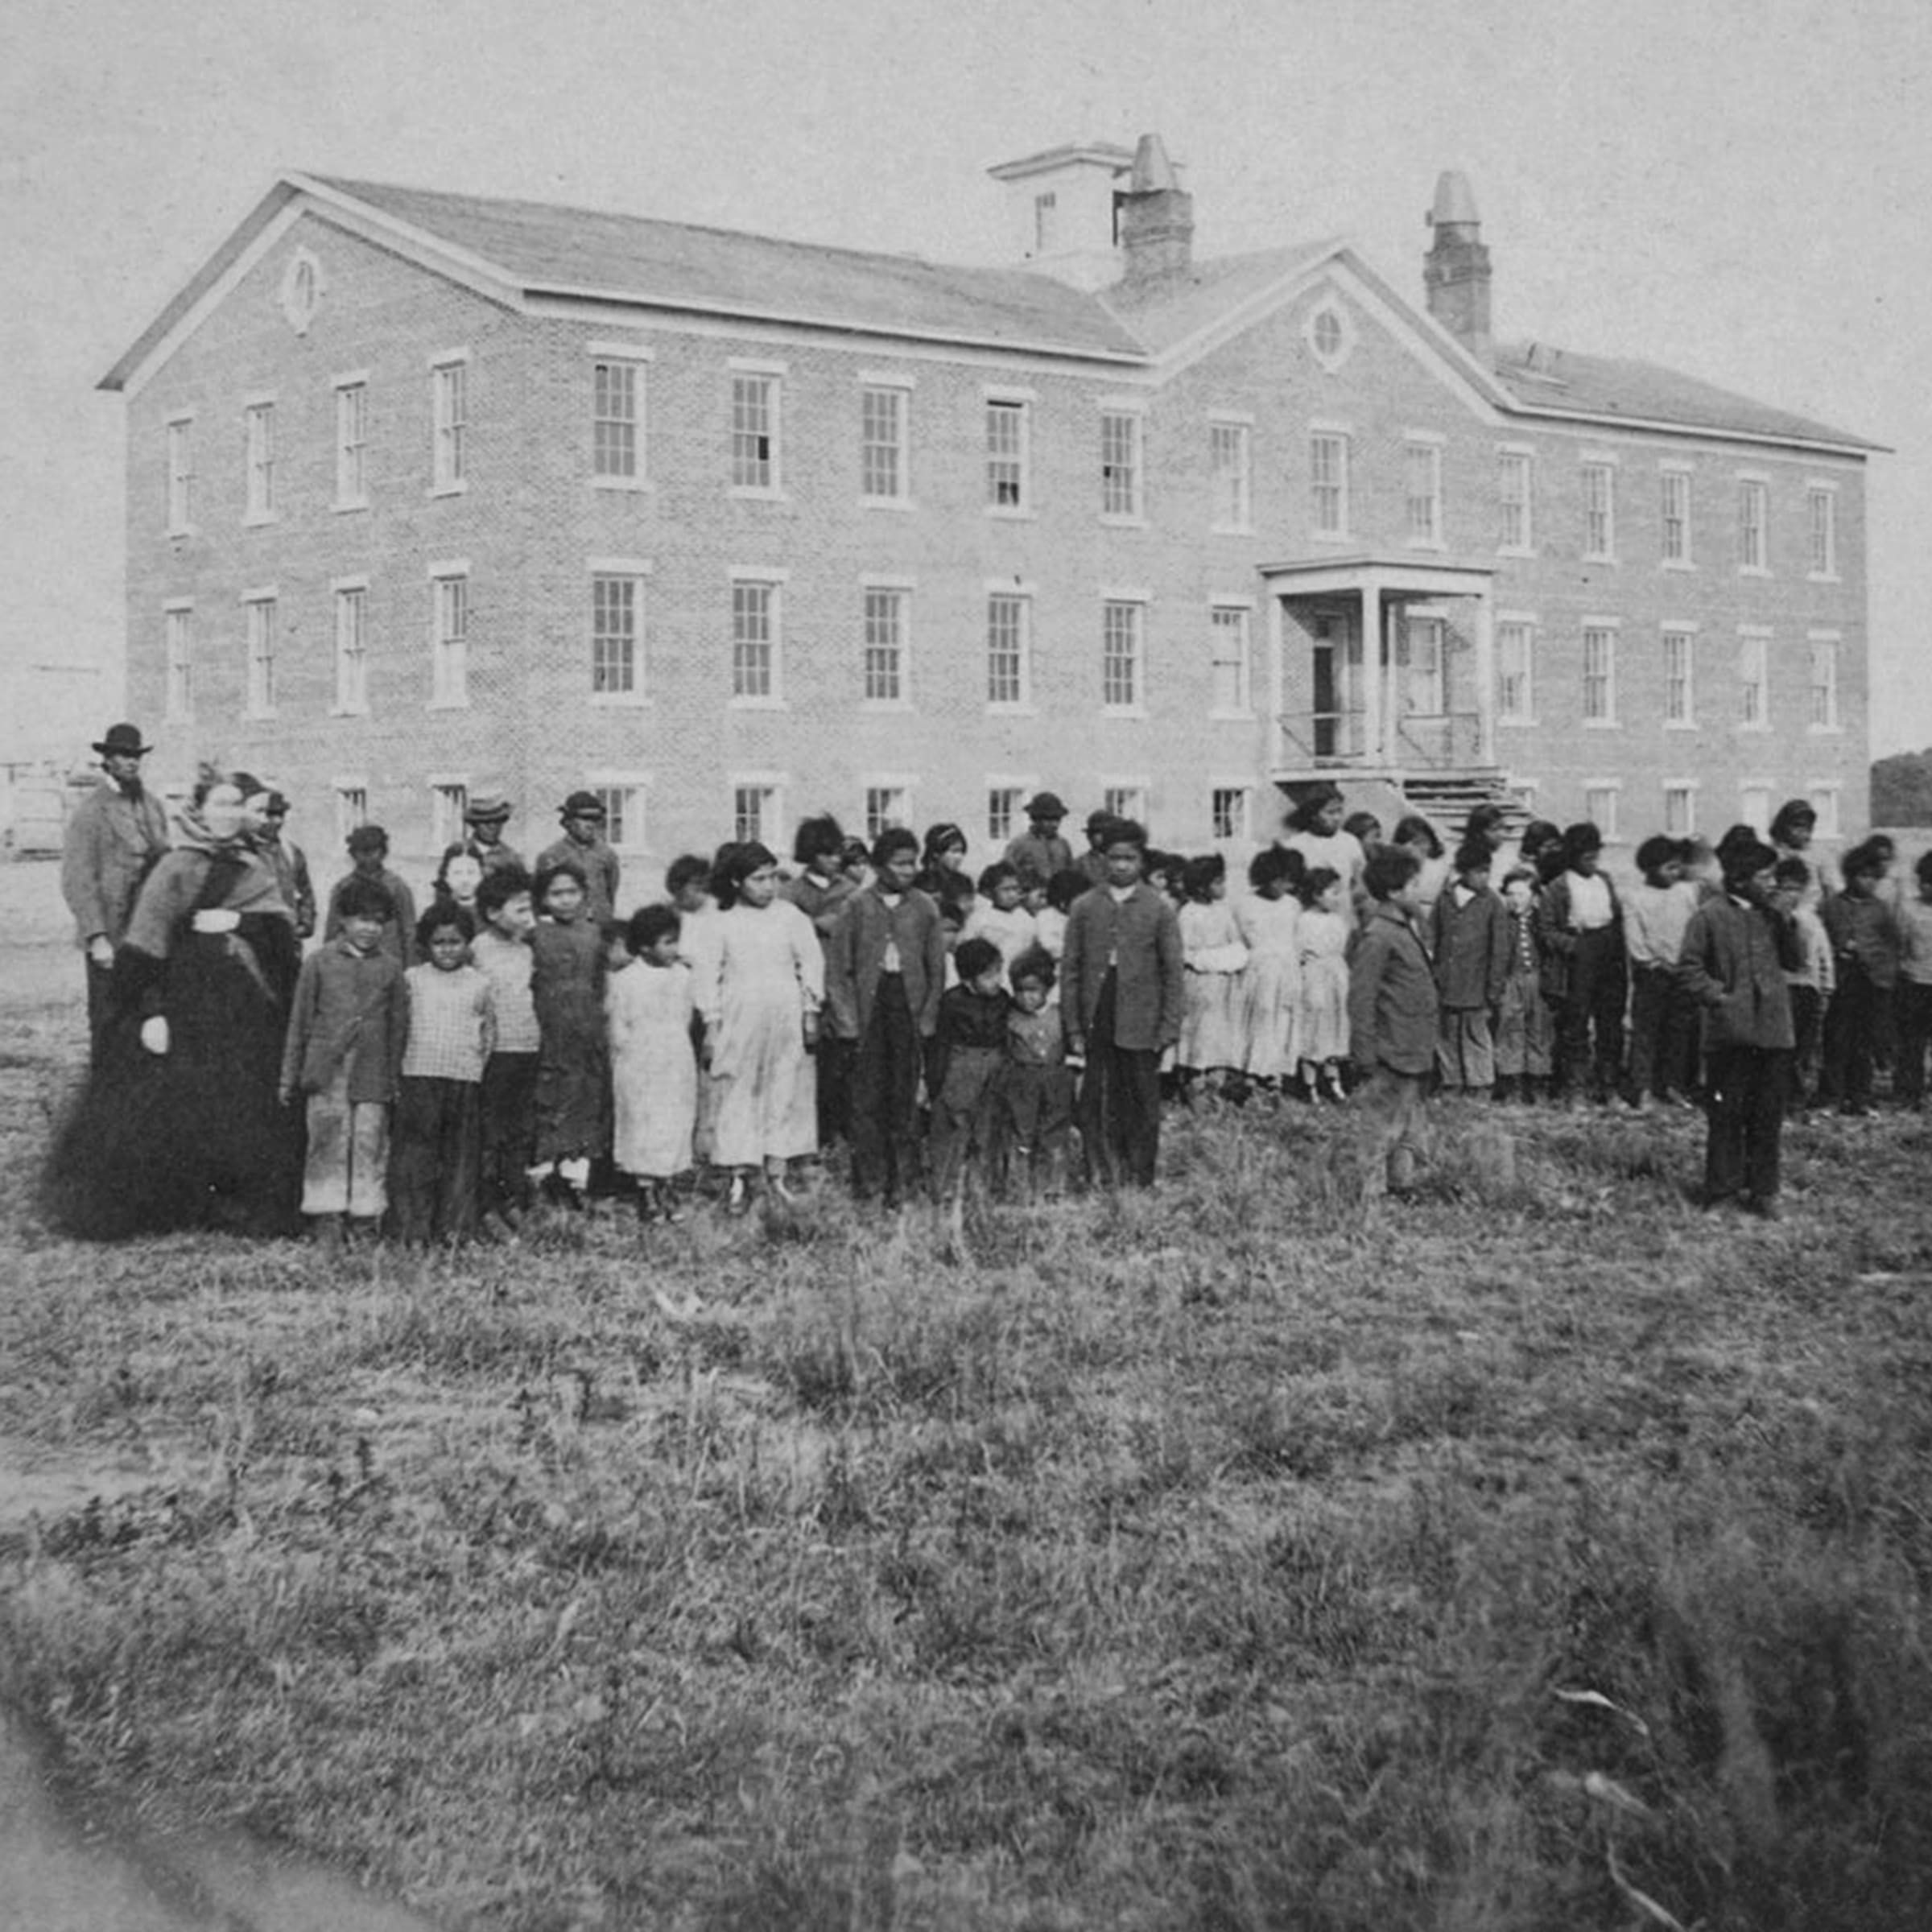 American Indian Boarding Schools: History and Healing